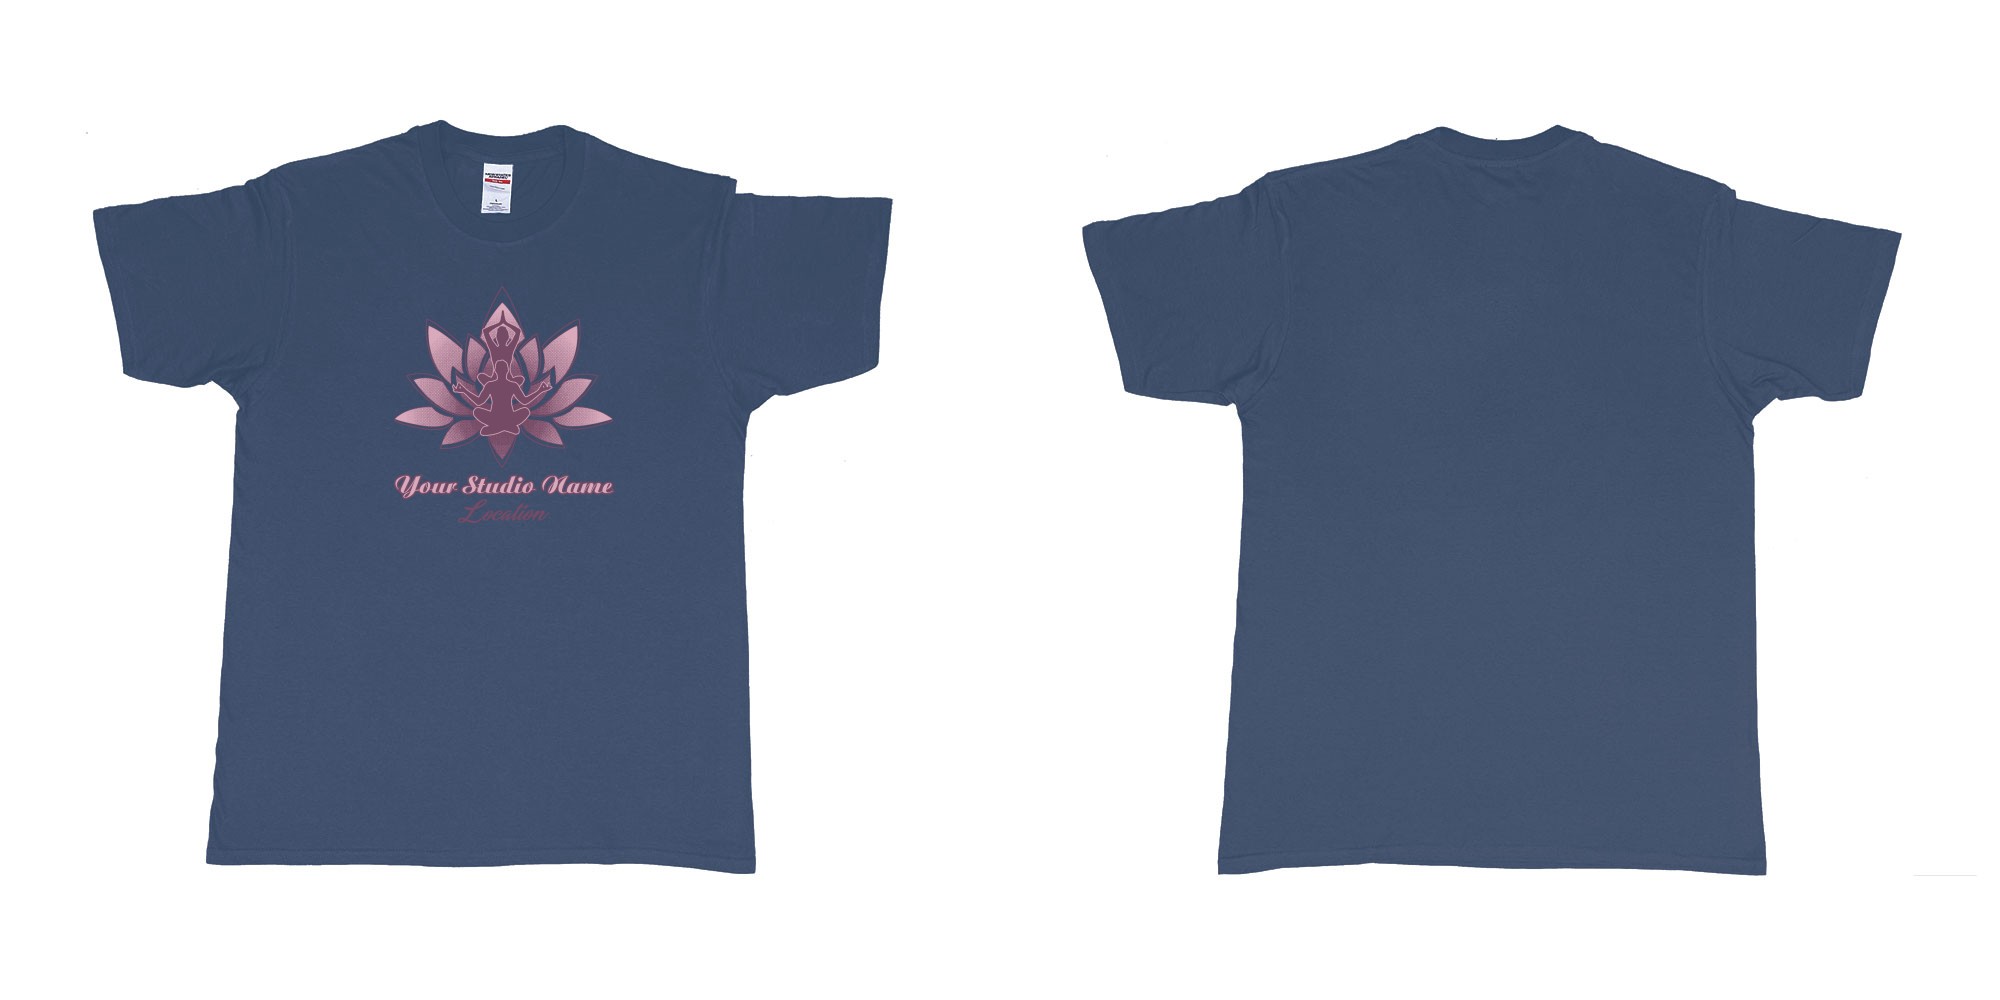 Custom tshirt design yoga meditation lotus own studio t shirt screen printing bali in fabric color navy choice your own text made in Bali by The Pirate Way